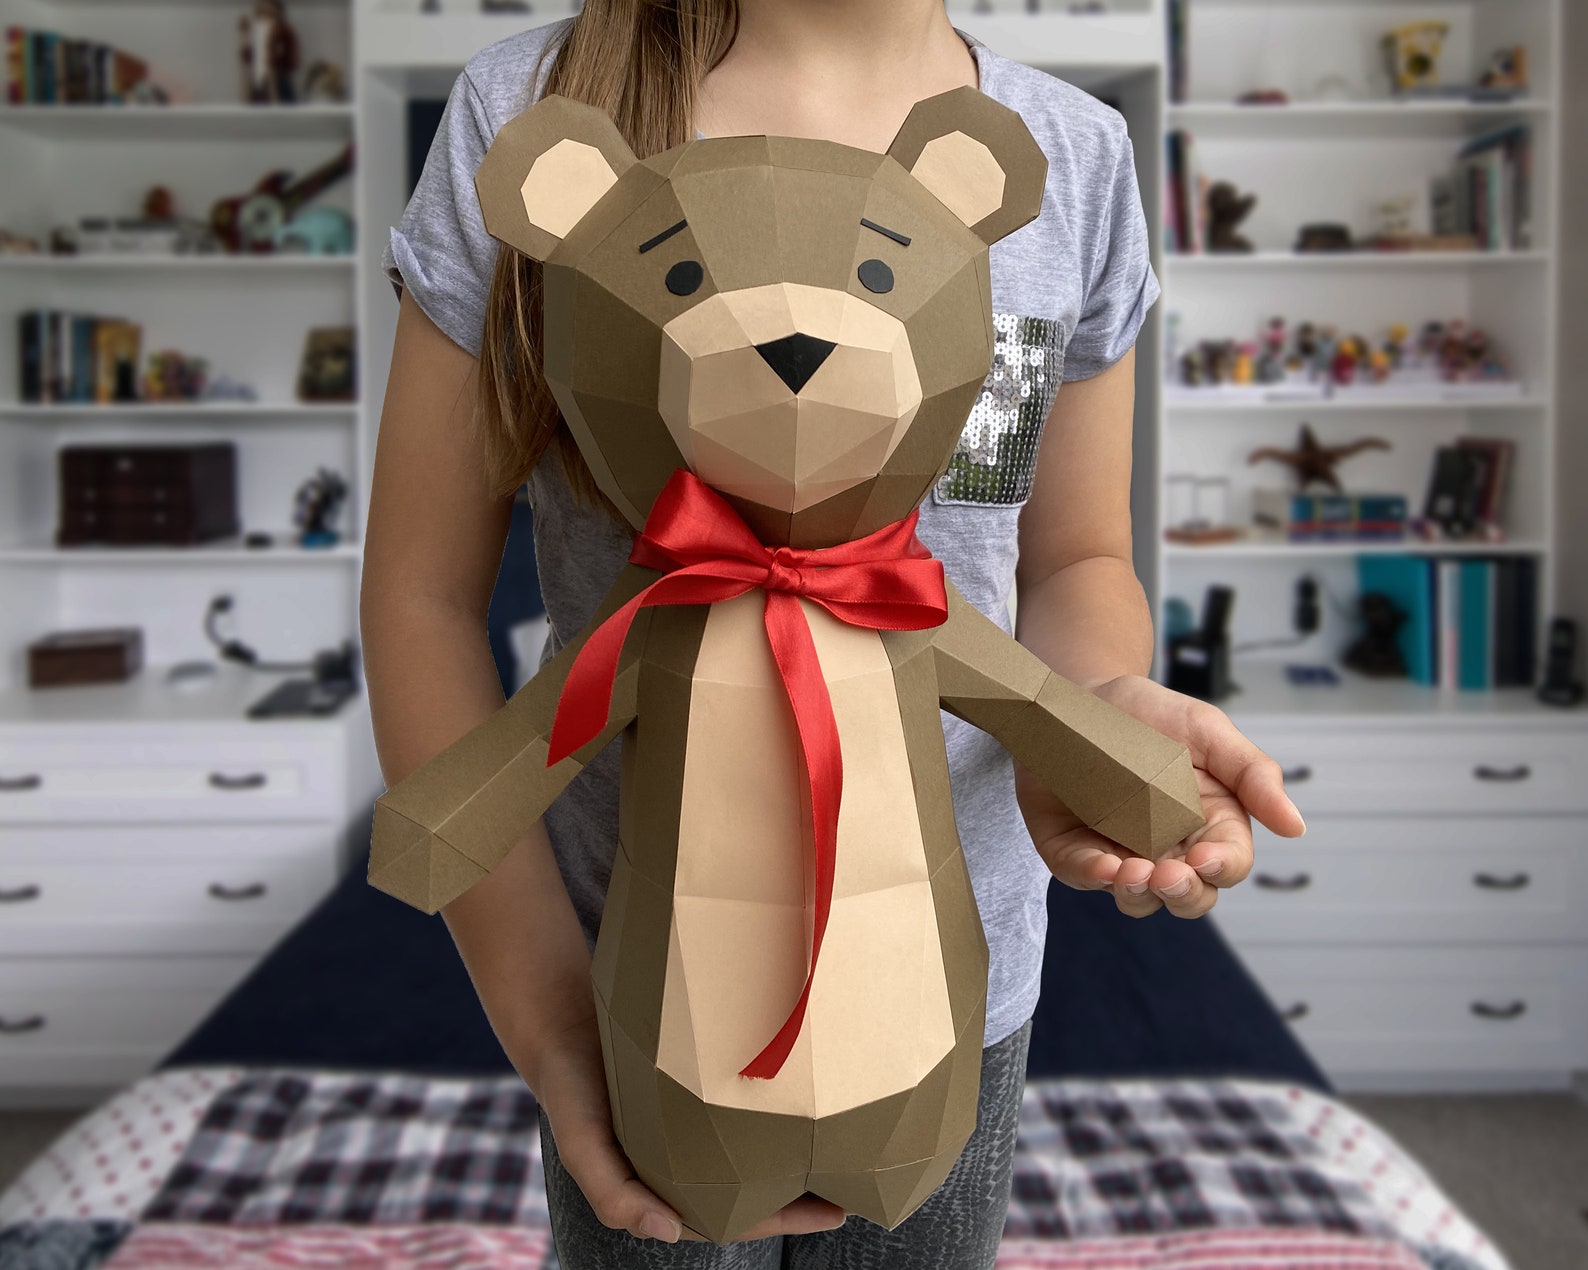 How To Make A Paper Teddy Bear Easy